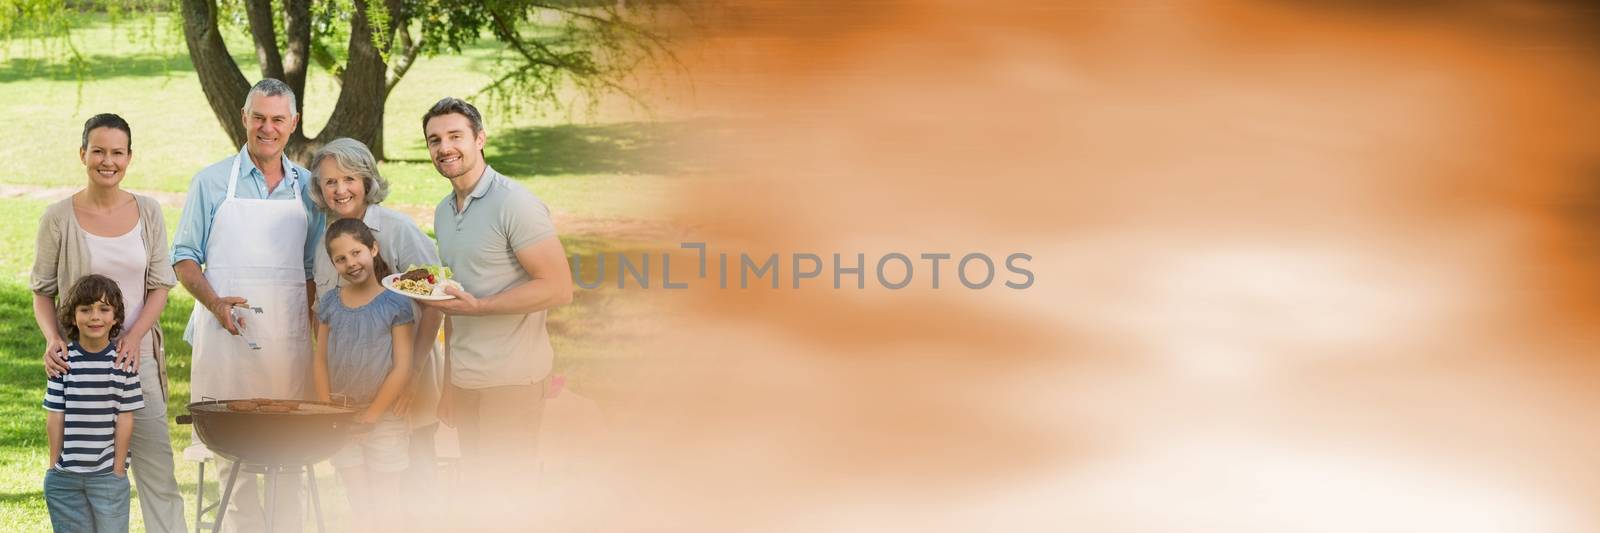 Digital composite of Family at bbq with blurry orange transition